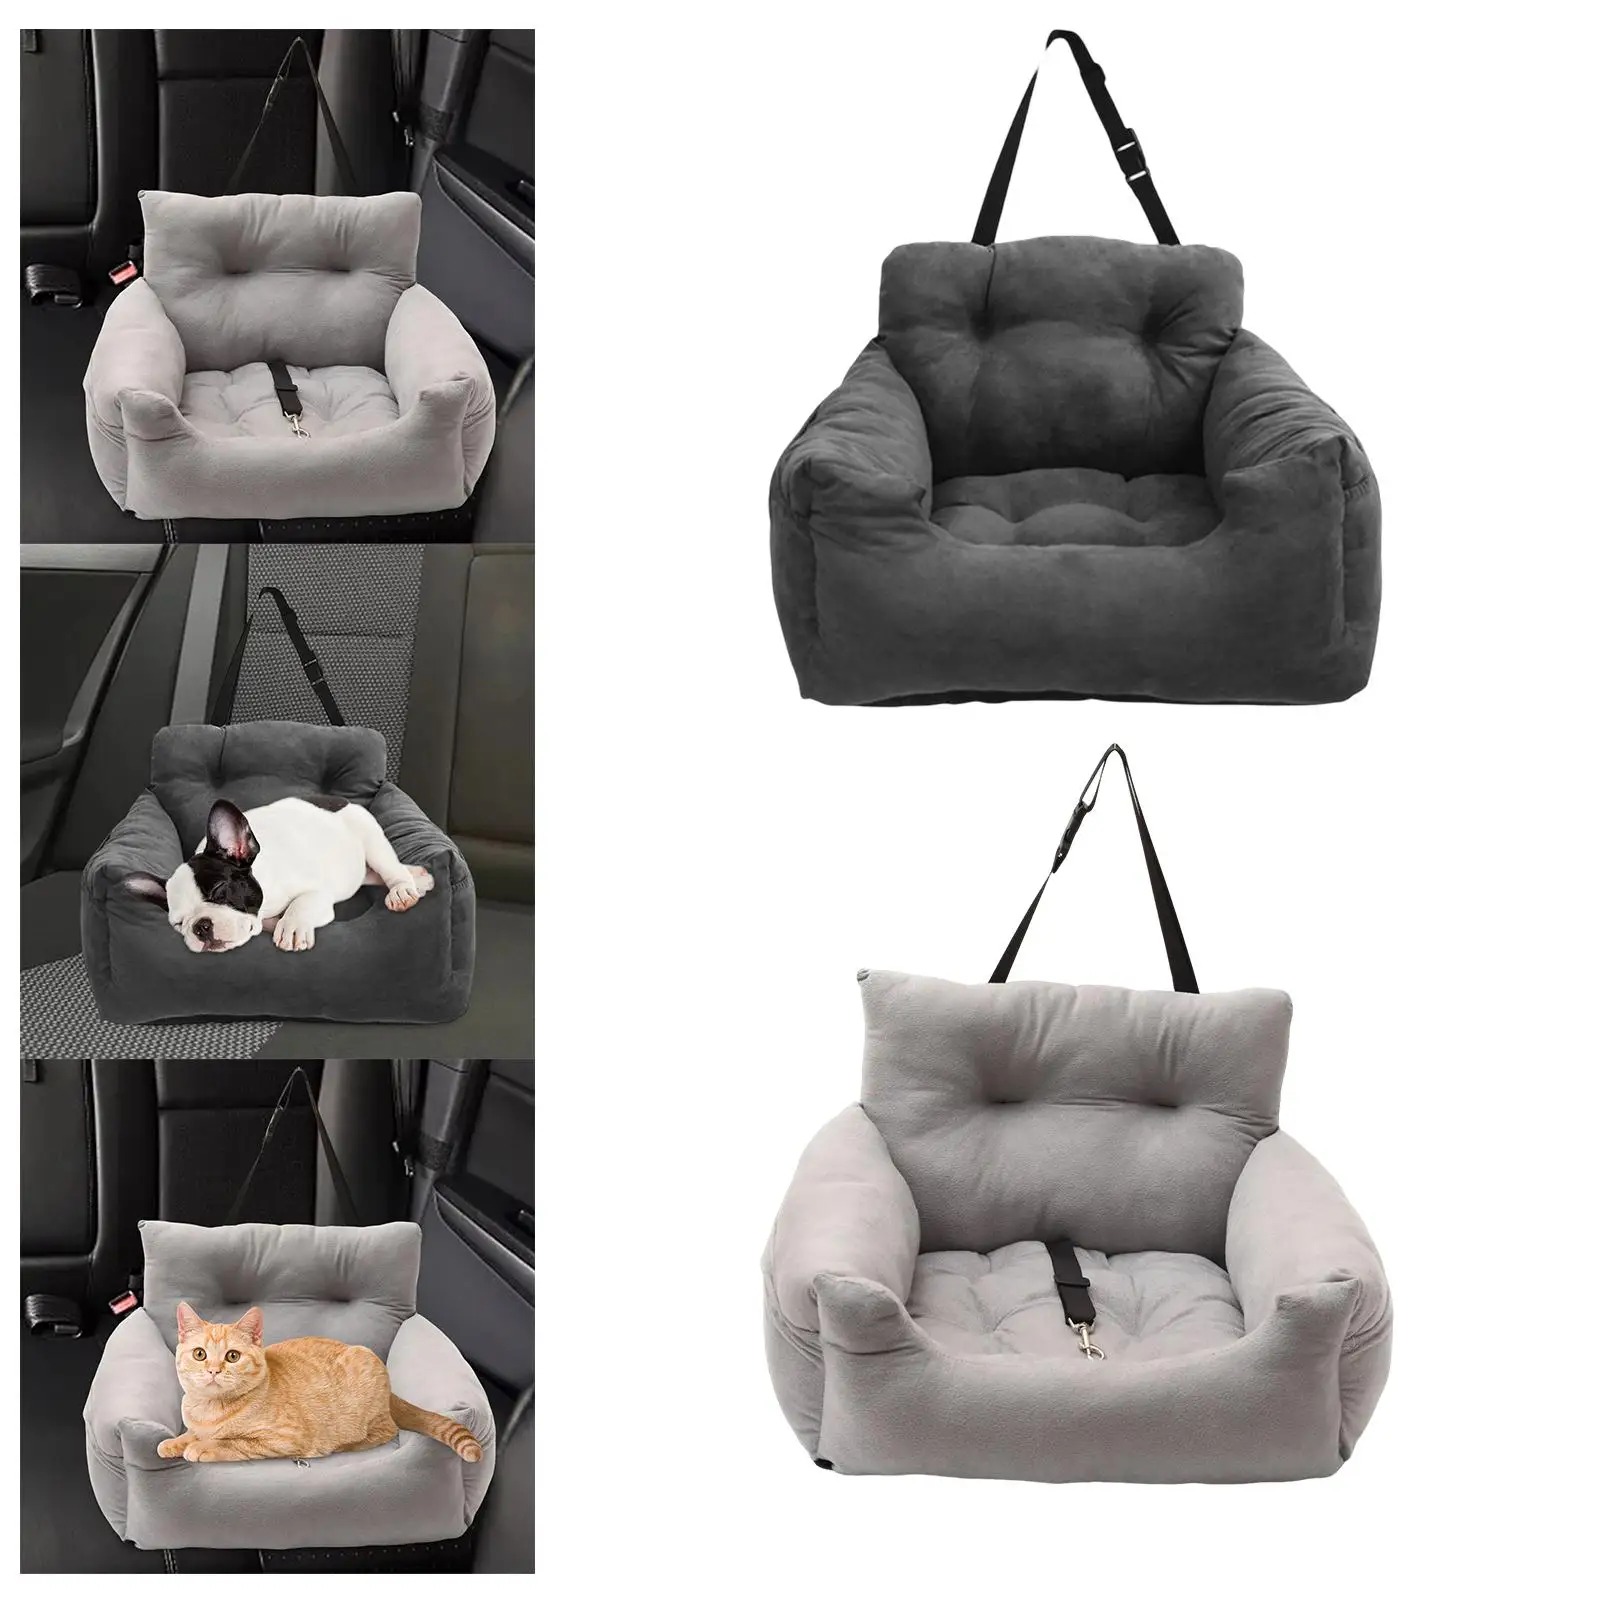 Portable Dog Bed Seat, Lightweight Sofa Outdoor Seat for Puppy Accessories